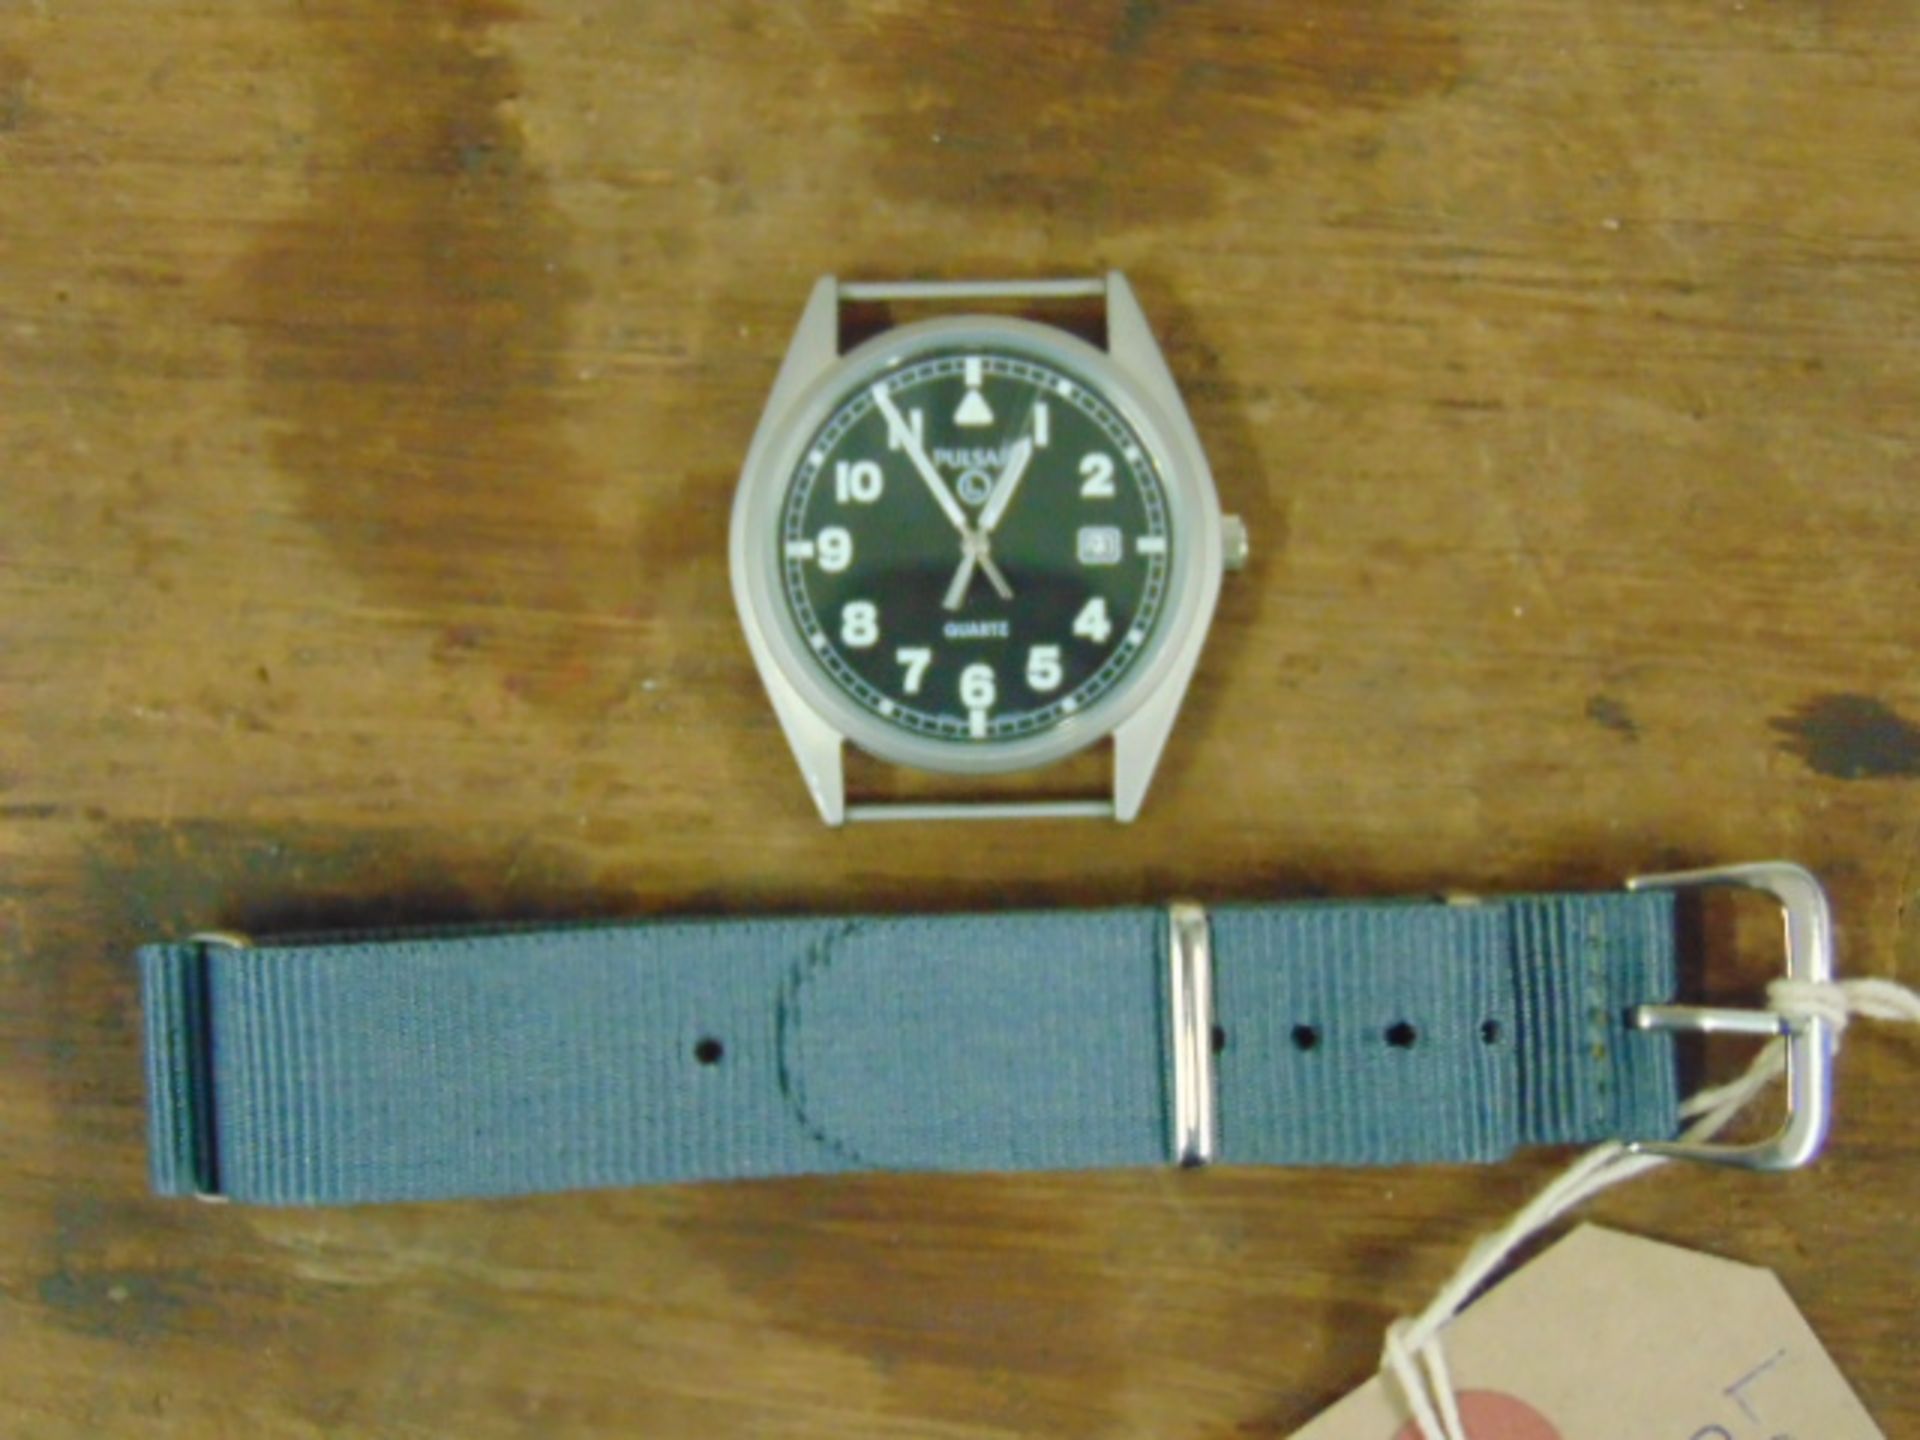 Unissued Pulsar G10 wrist watch complete with original box - Image 4 of 6